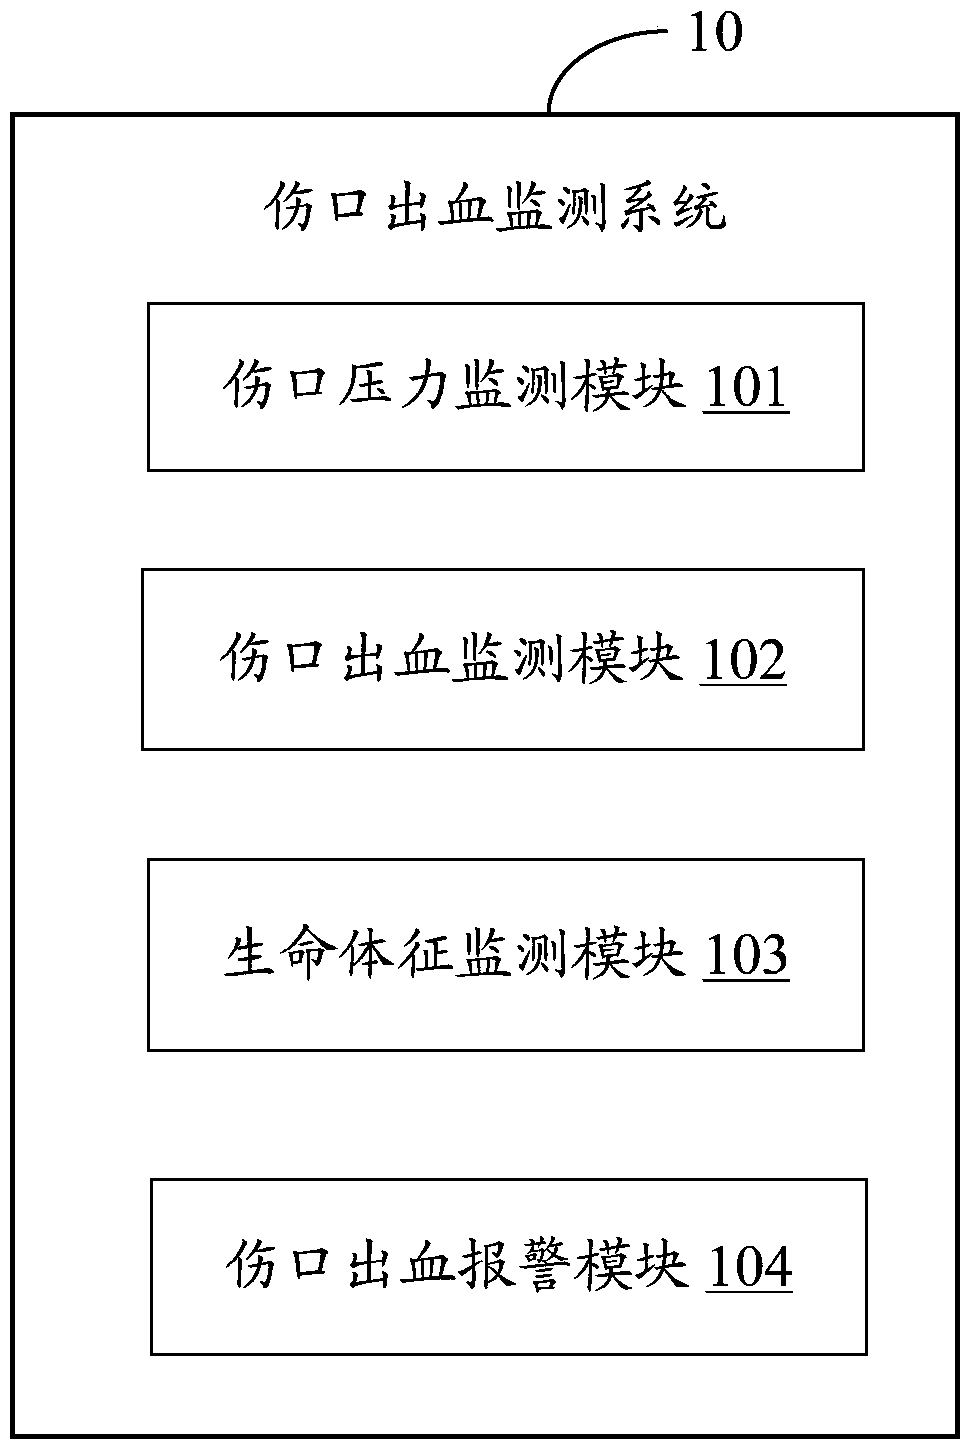 Wound bleeding monitoring system and method